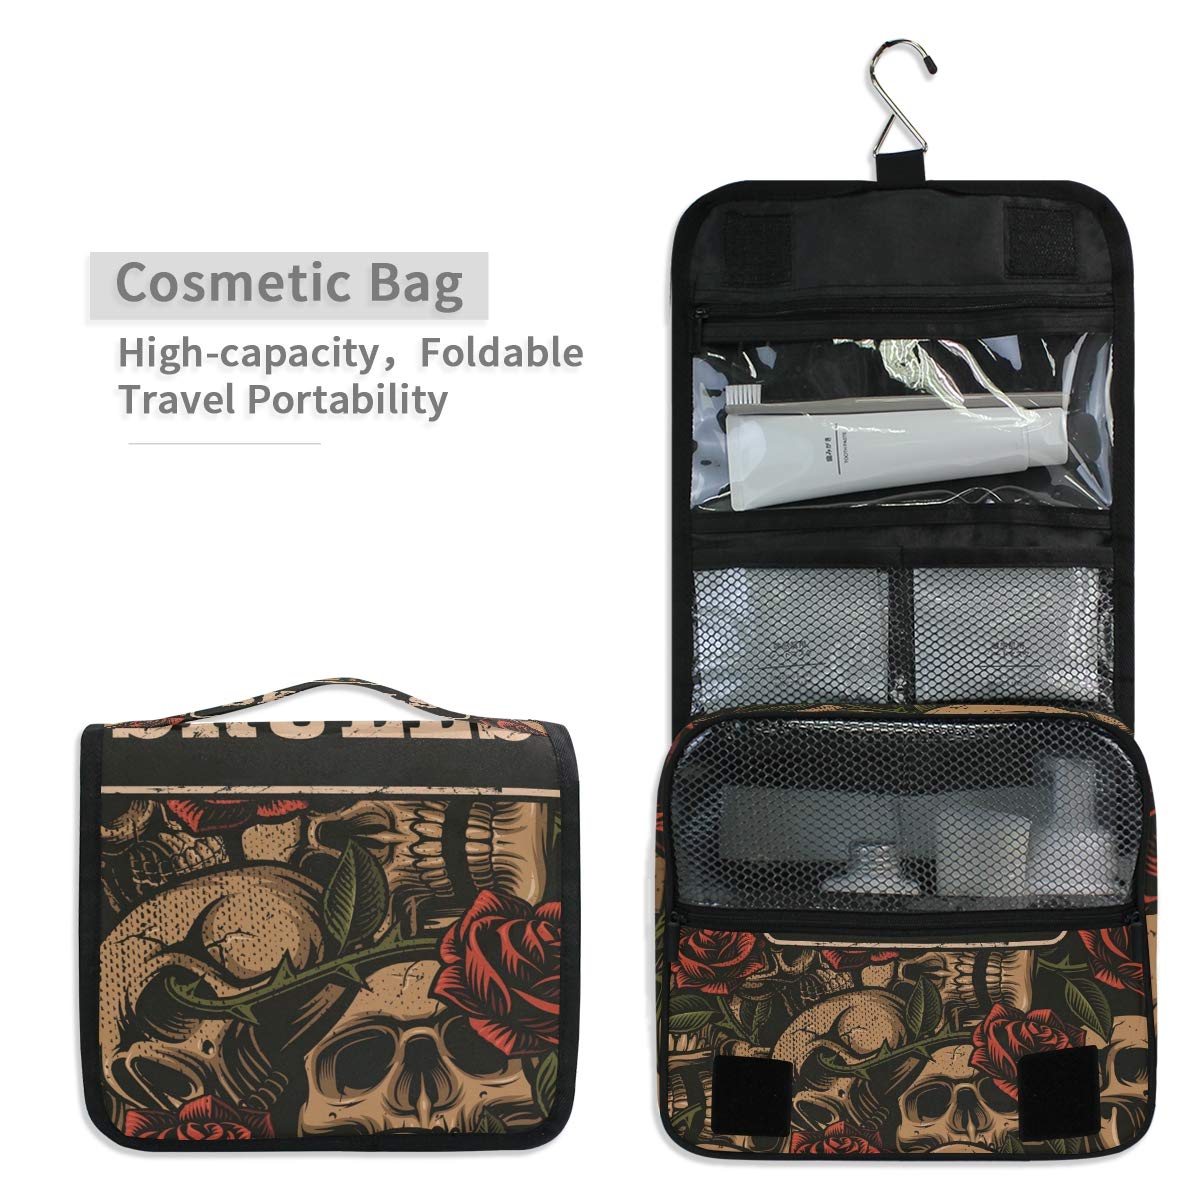 ALAZA Skull With Rose Vintage Travel Toiletry Bag Hanging Multifunction Cosmetic Case Portable Makeup Pouch Organizer with Hook